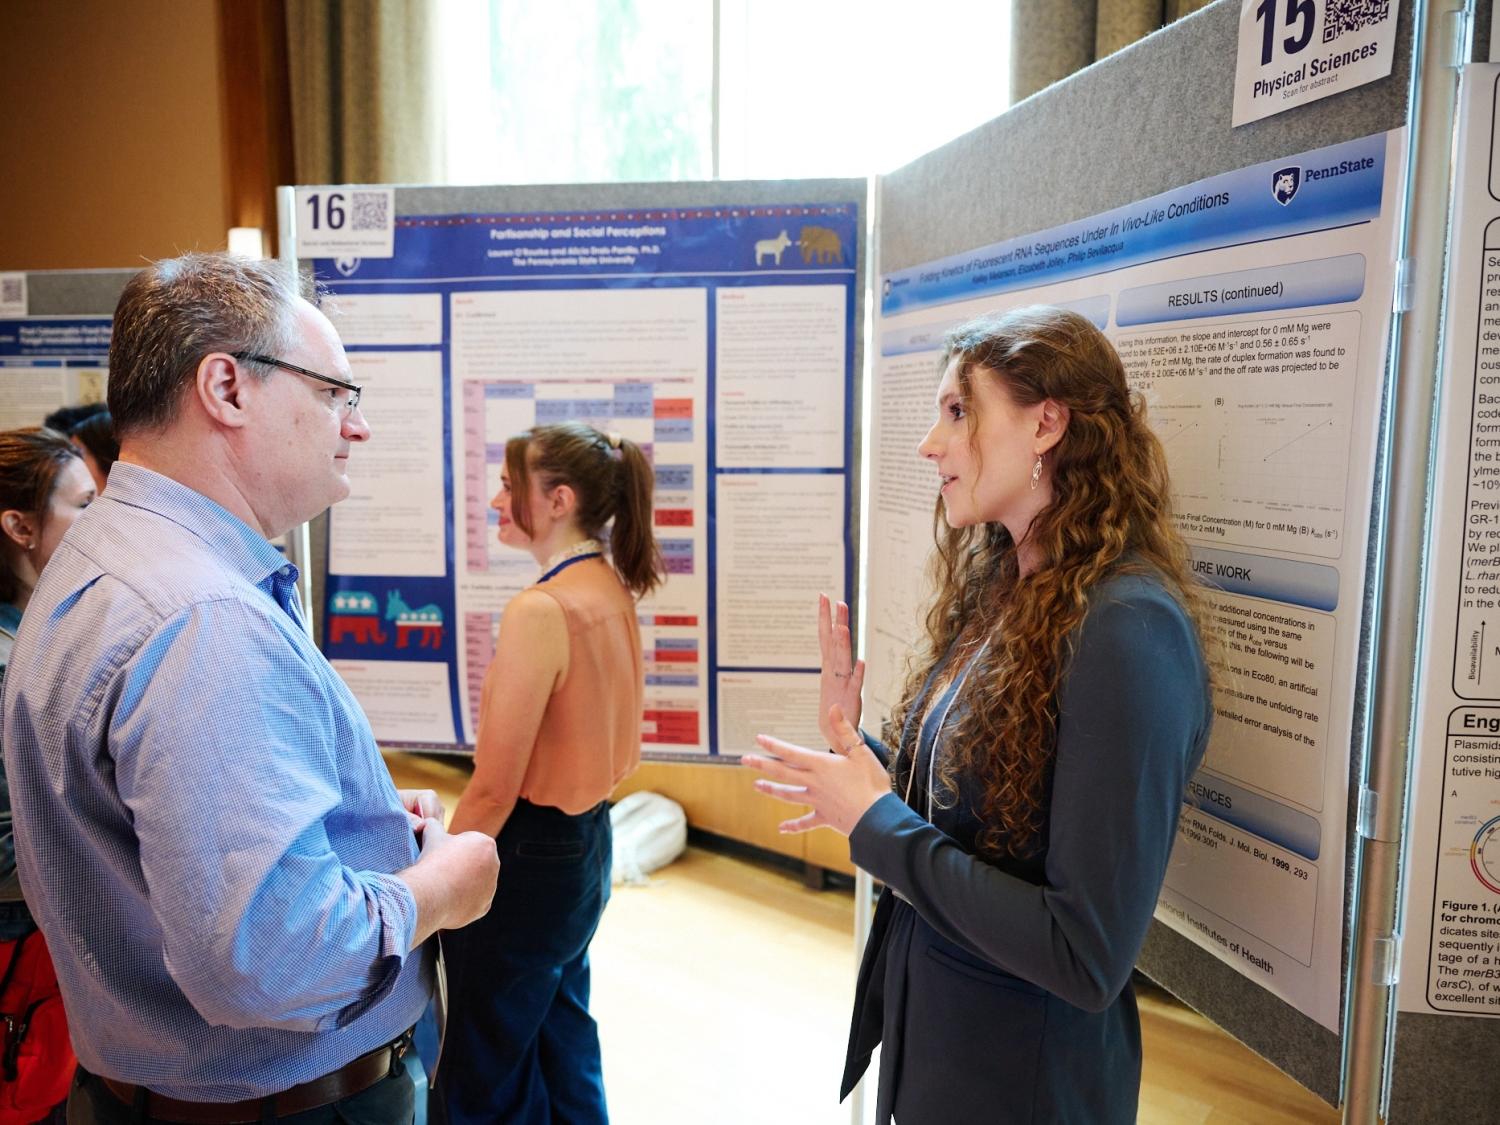 Faculty judge hearing explanation from student presenter in front of a research poster